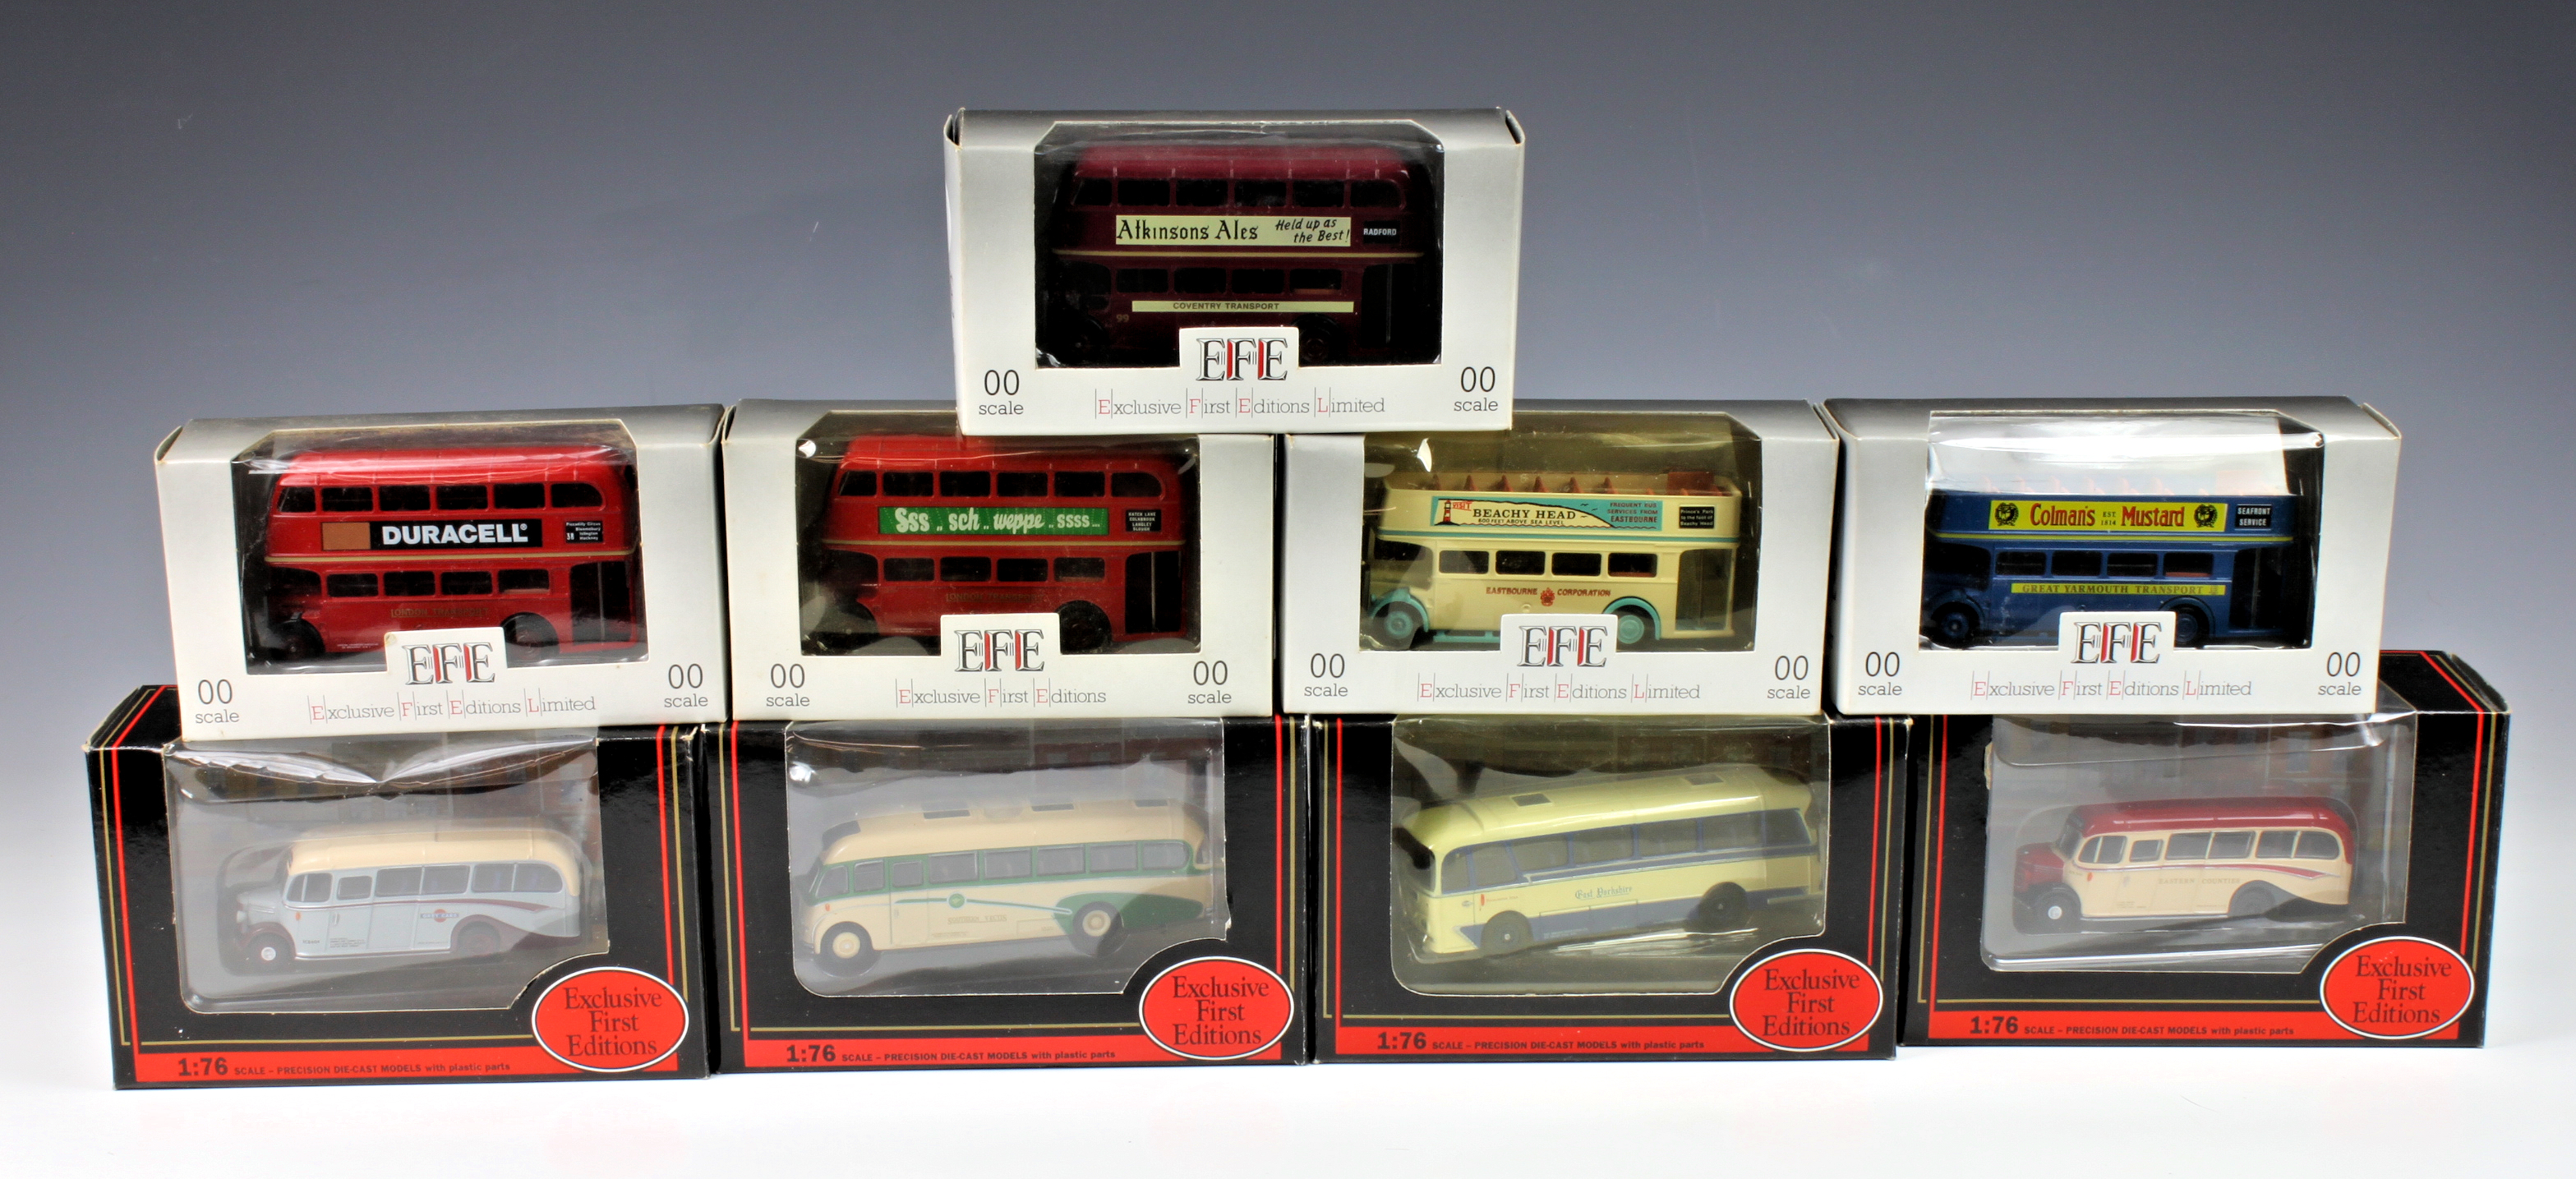 Exclusive First Editions - Twenty four boxed diecast Buses, to include The Rank Hovis Story & The R. - Image 4 of 4